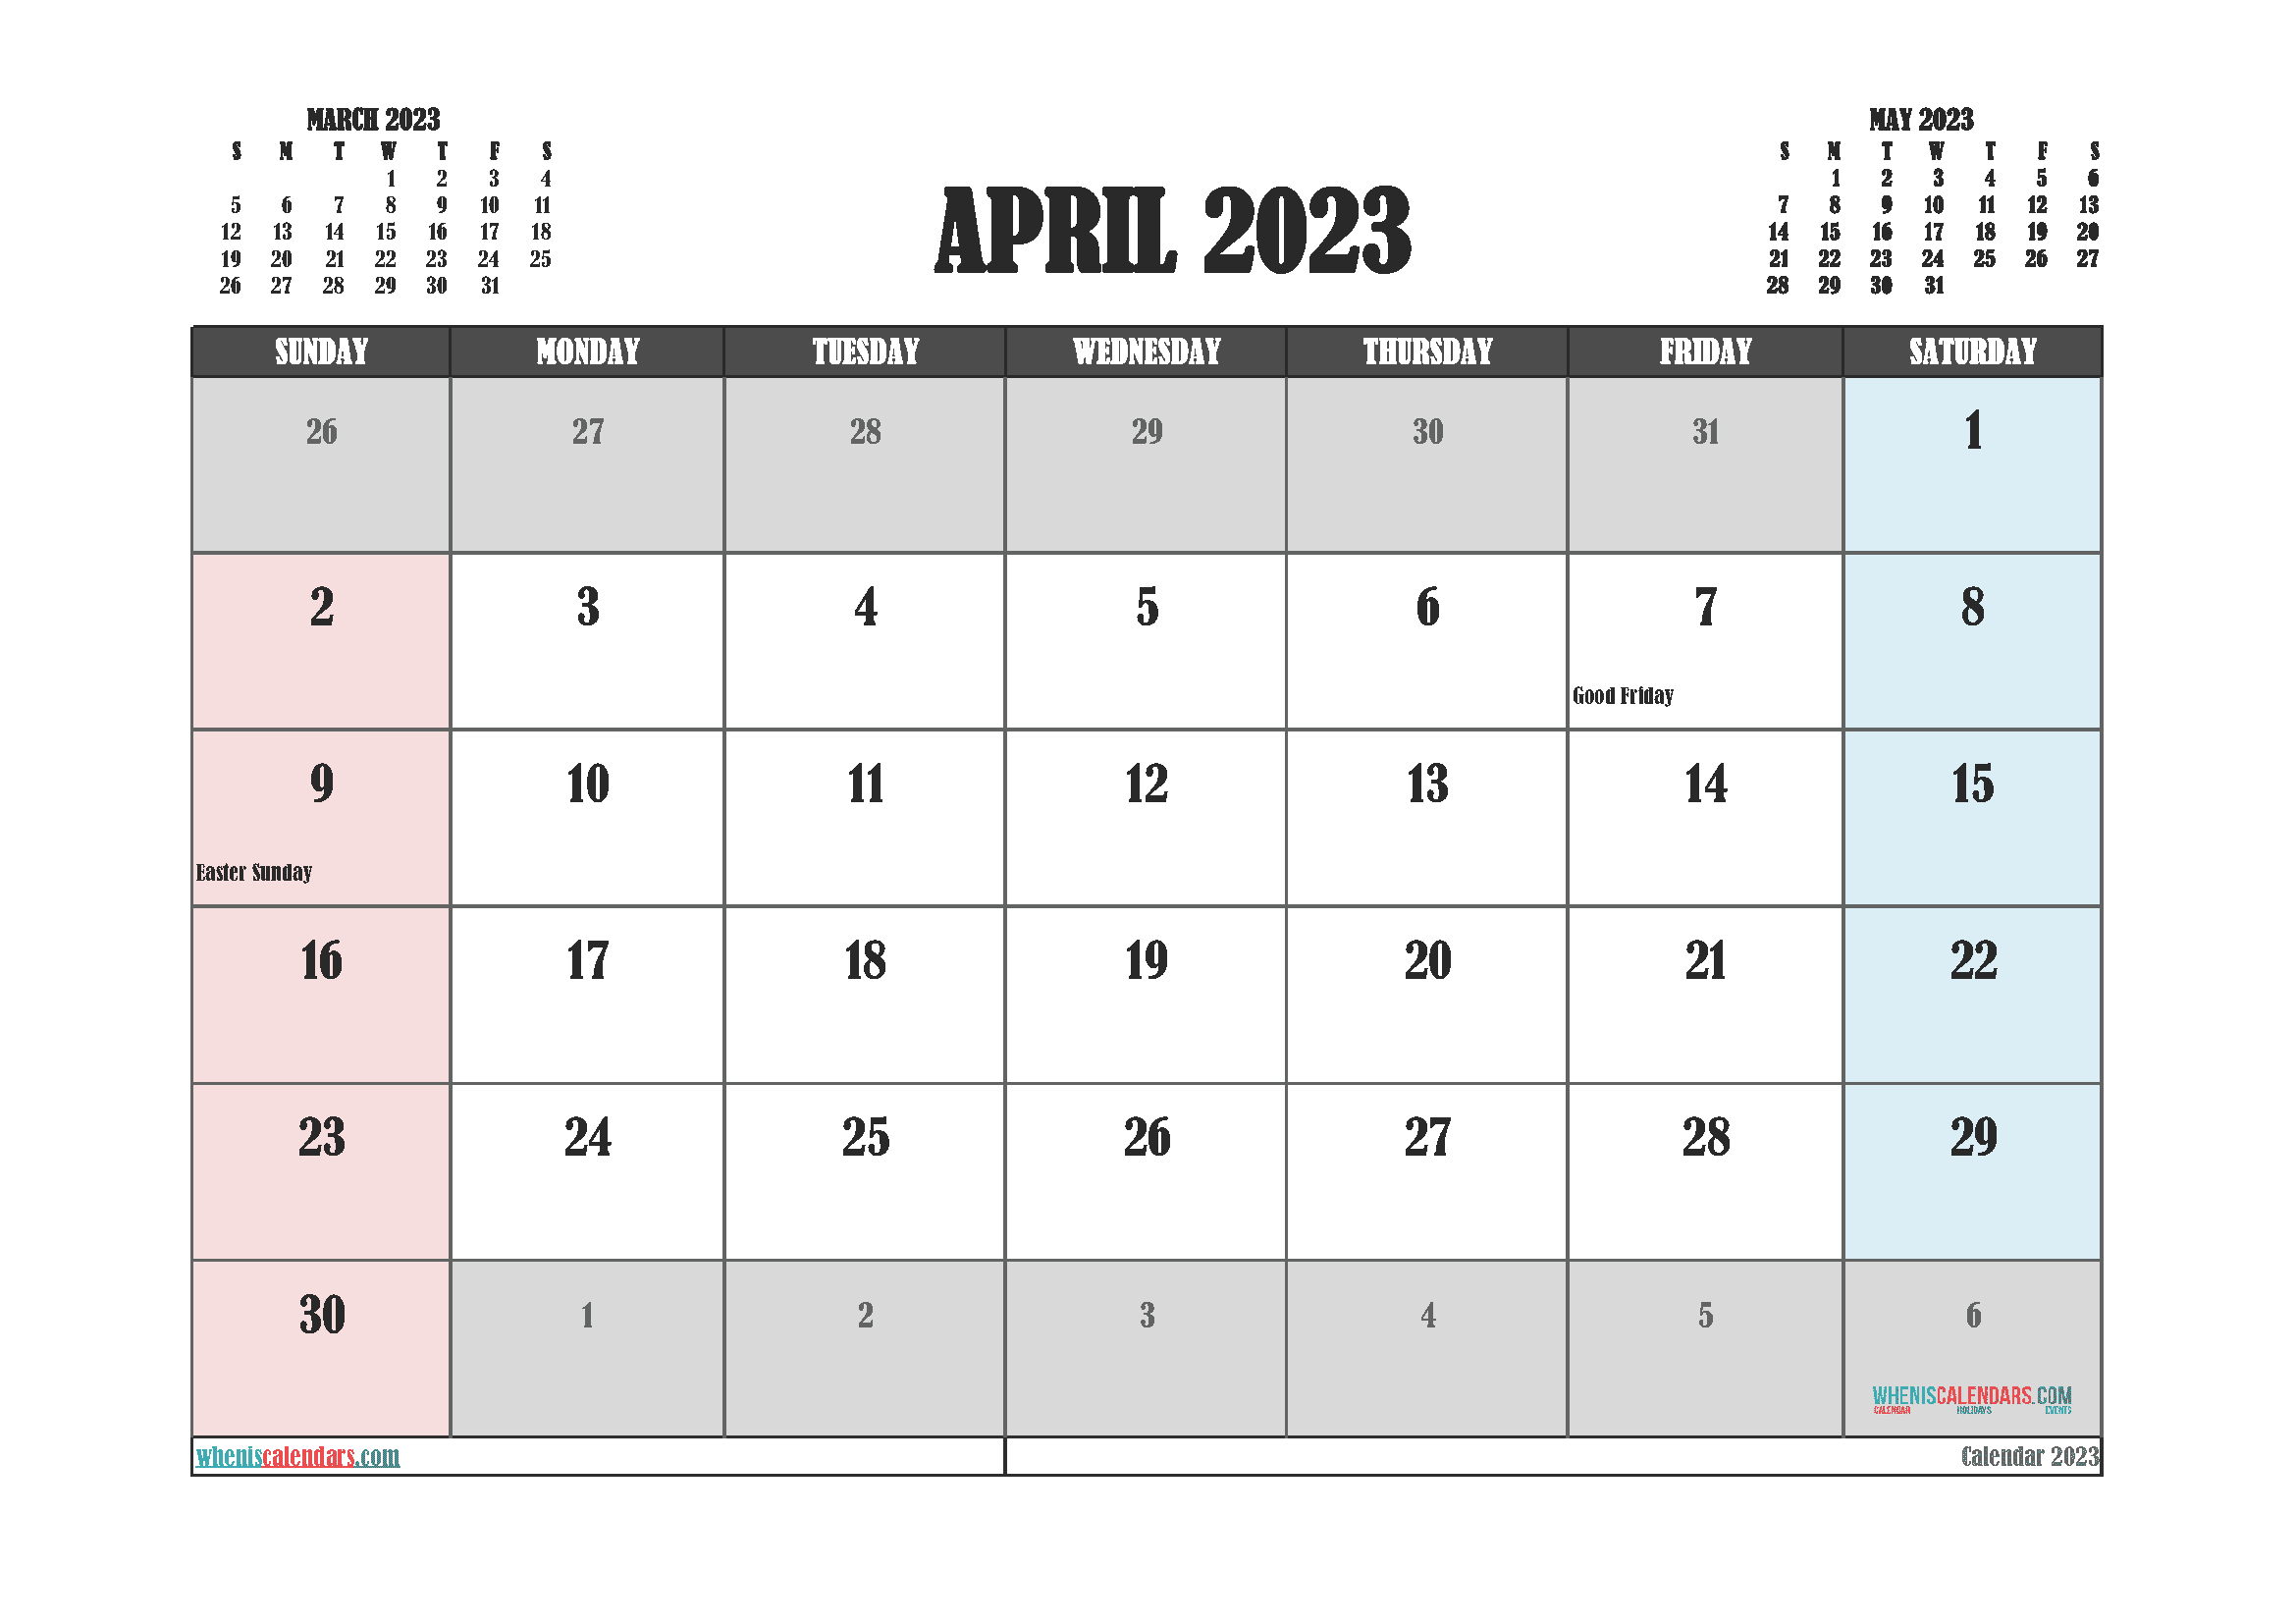 Free Calendar 2023 April with Holidays PDF in Landscape